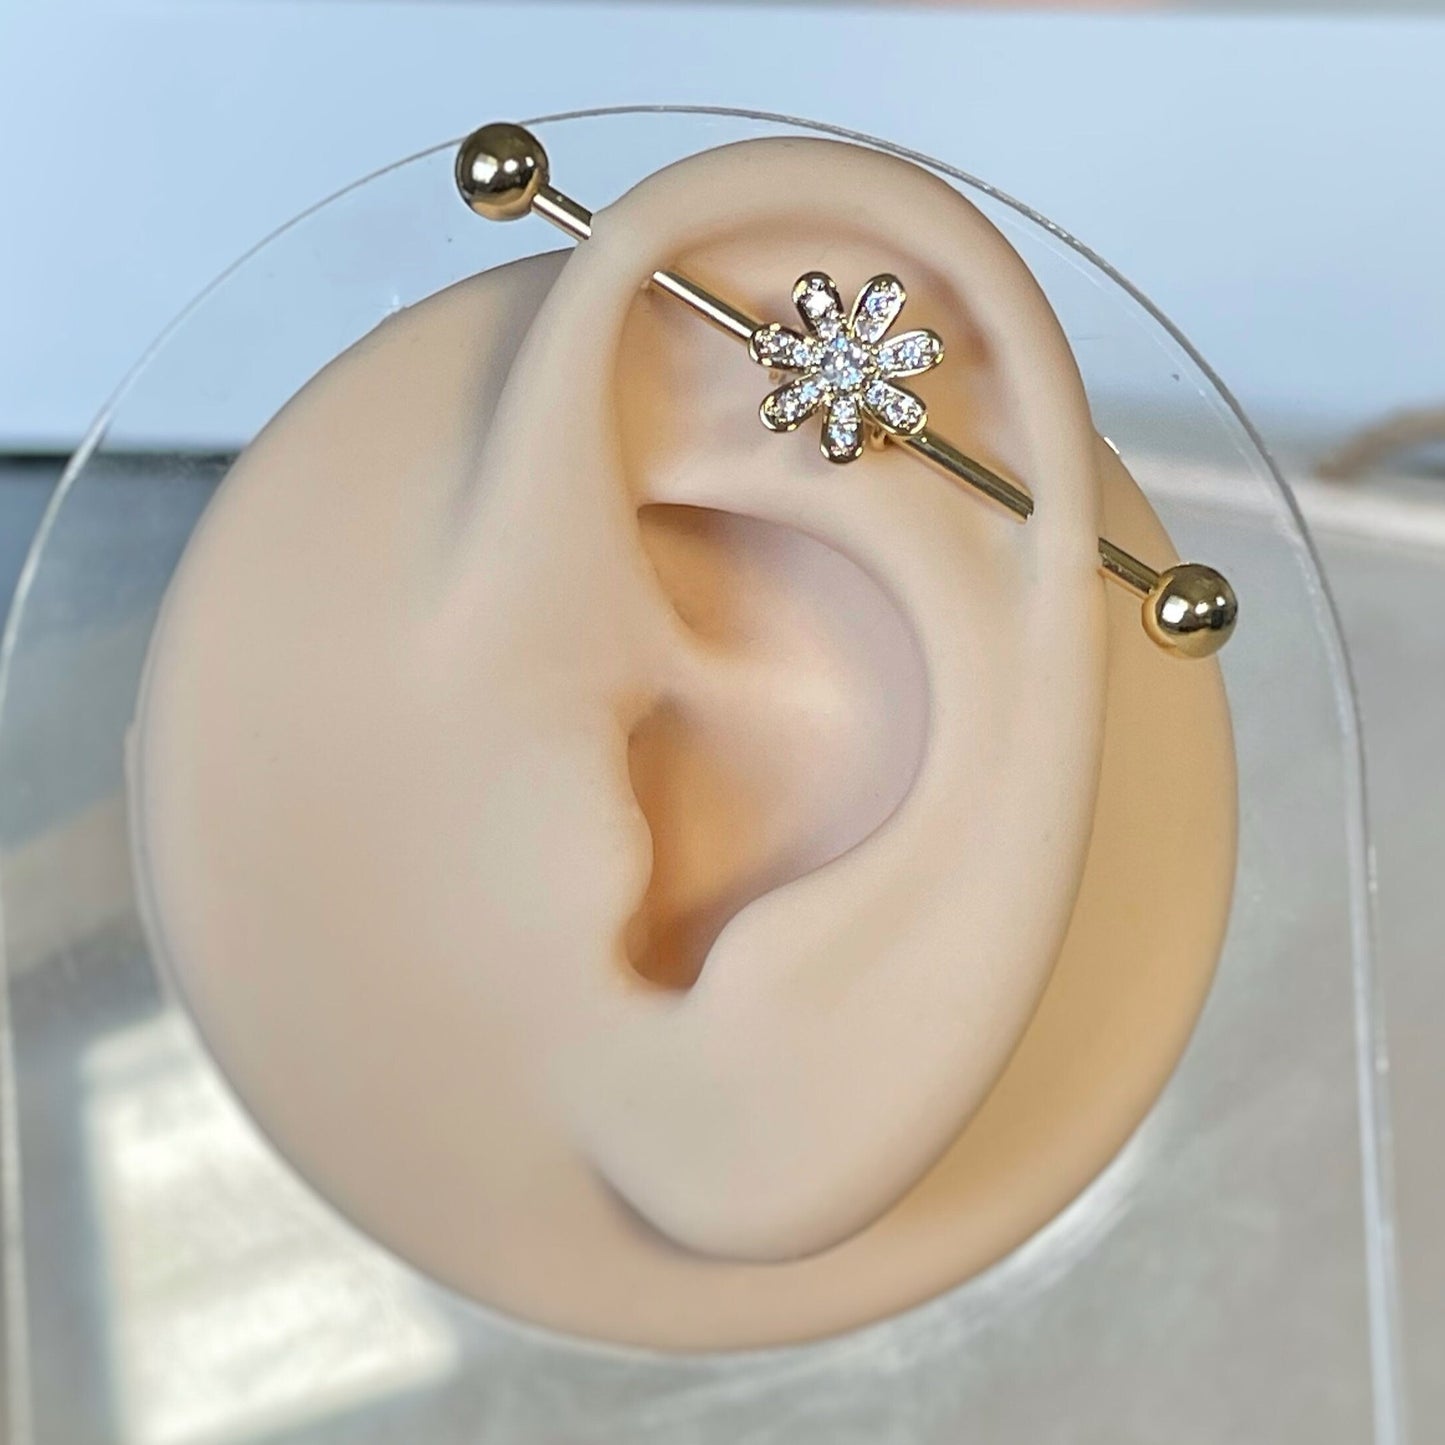 Gold Floral Industrial Piercing Jewelry (14G | 38mm | Surgical Steel | Gold, Silver or Rose Gold)